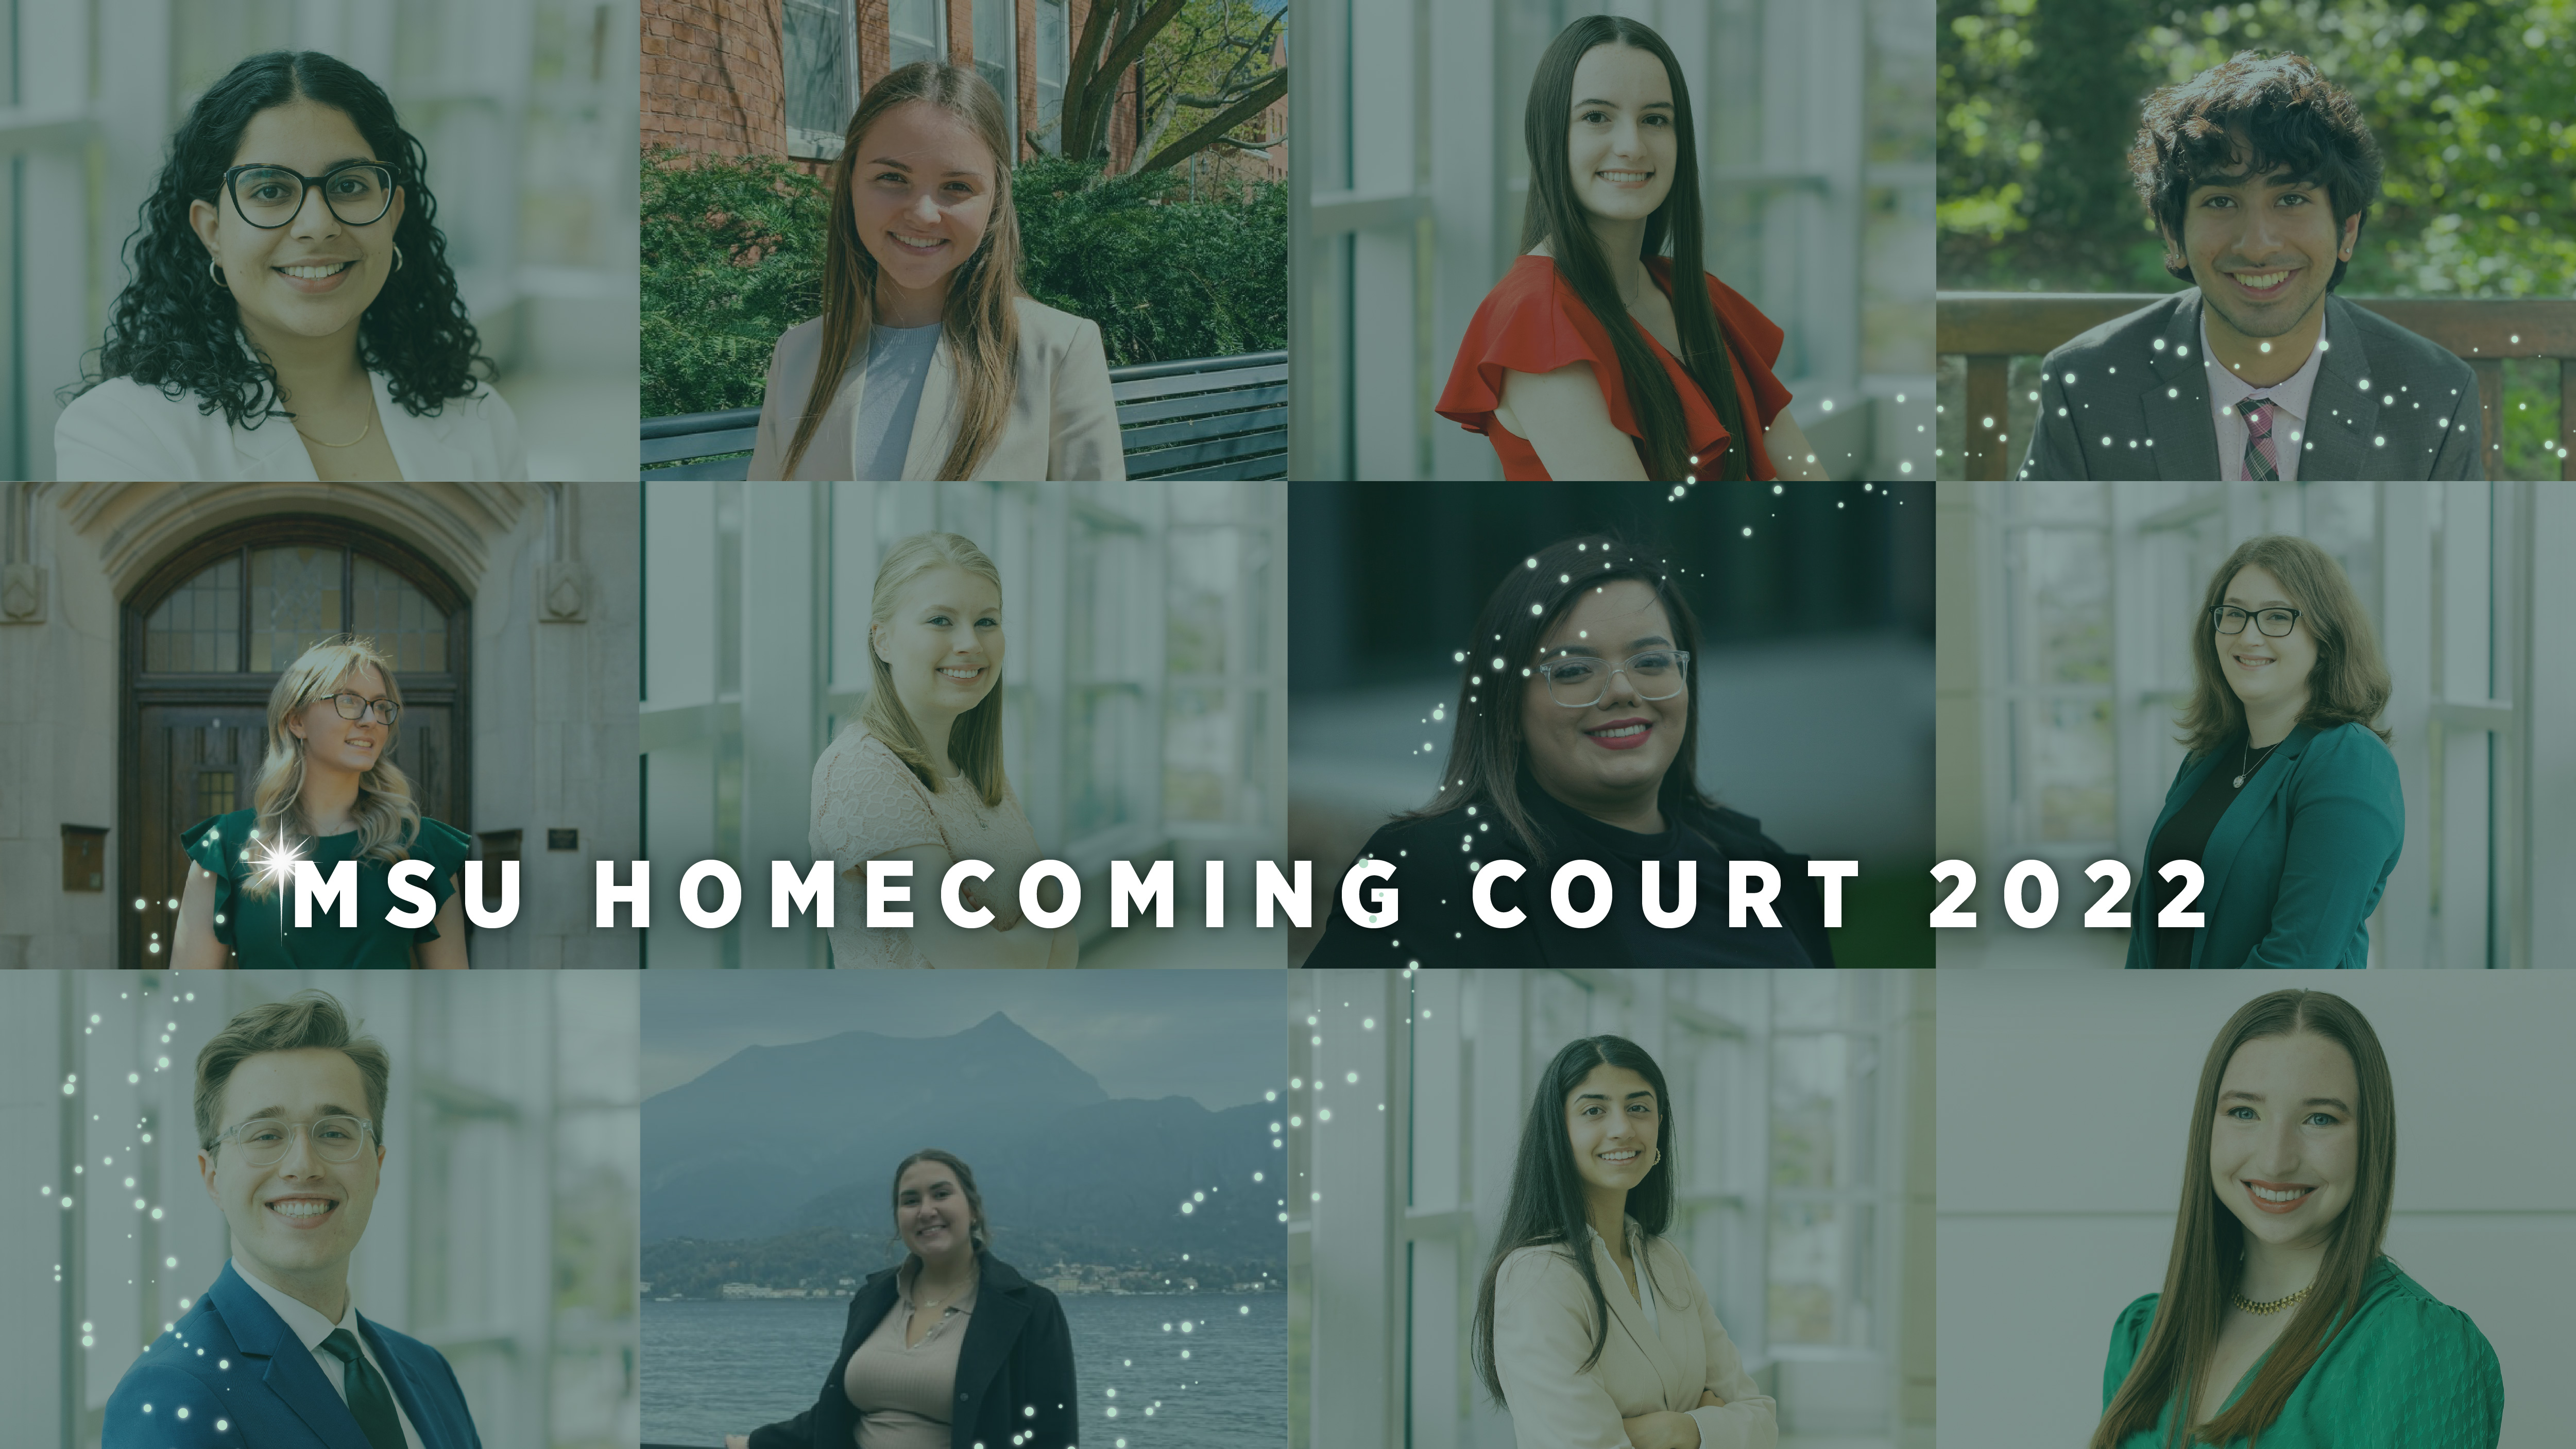 Five students represent College of Social Science on 2022 Homecoming Court